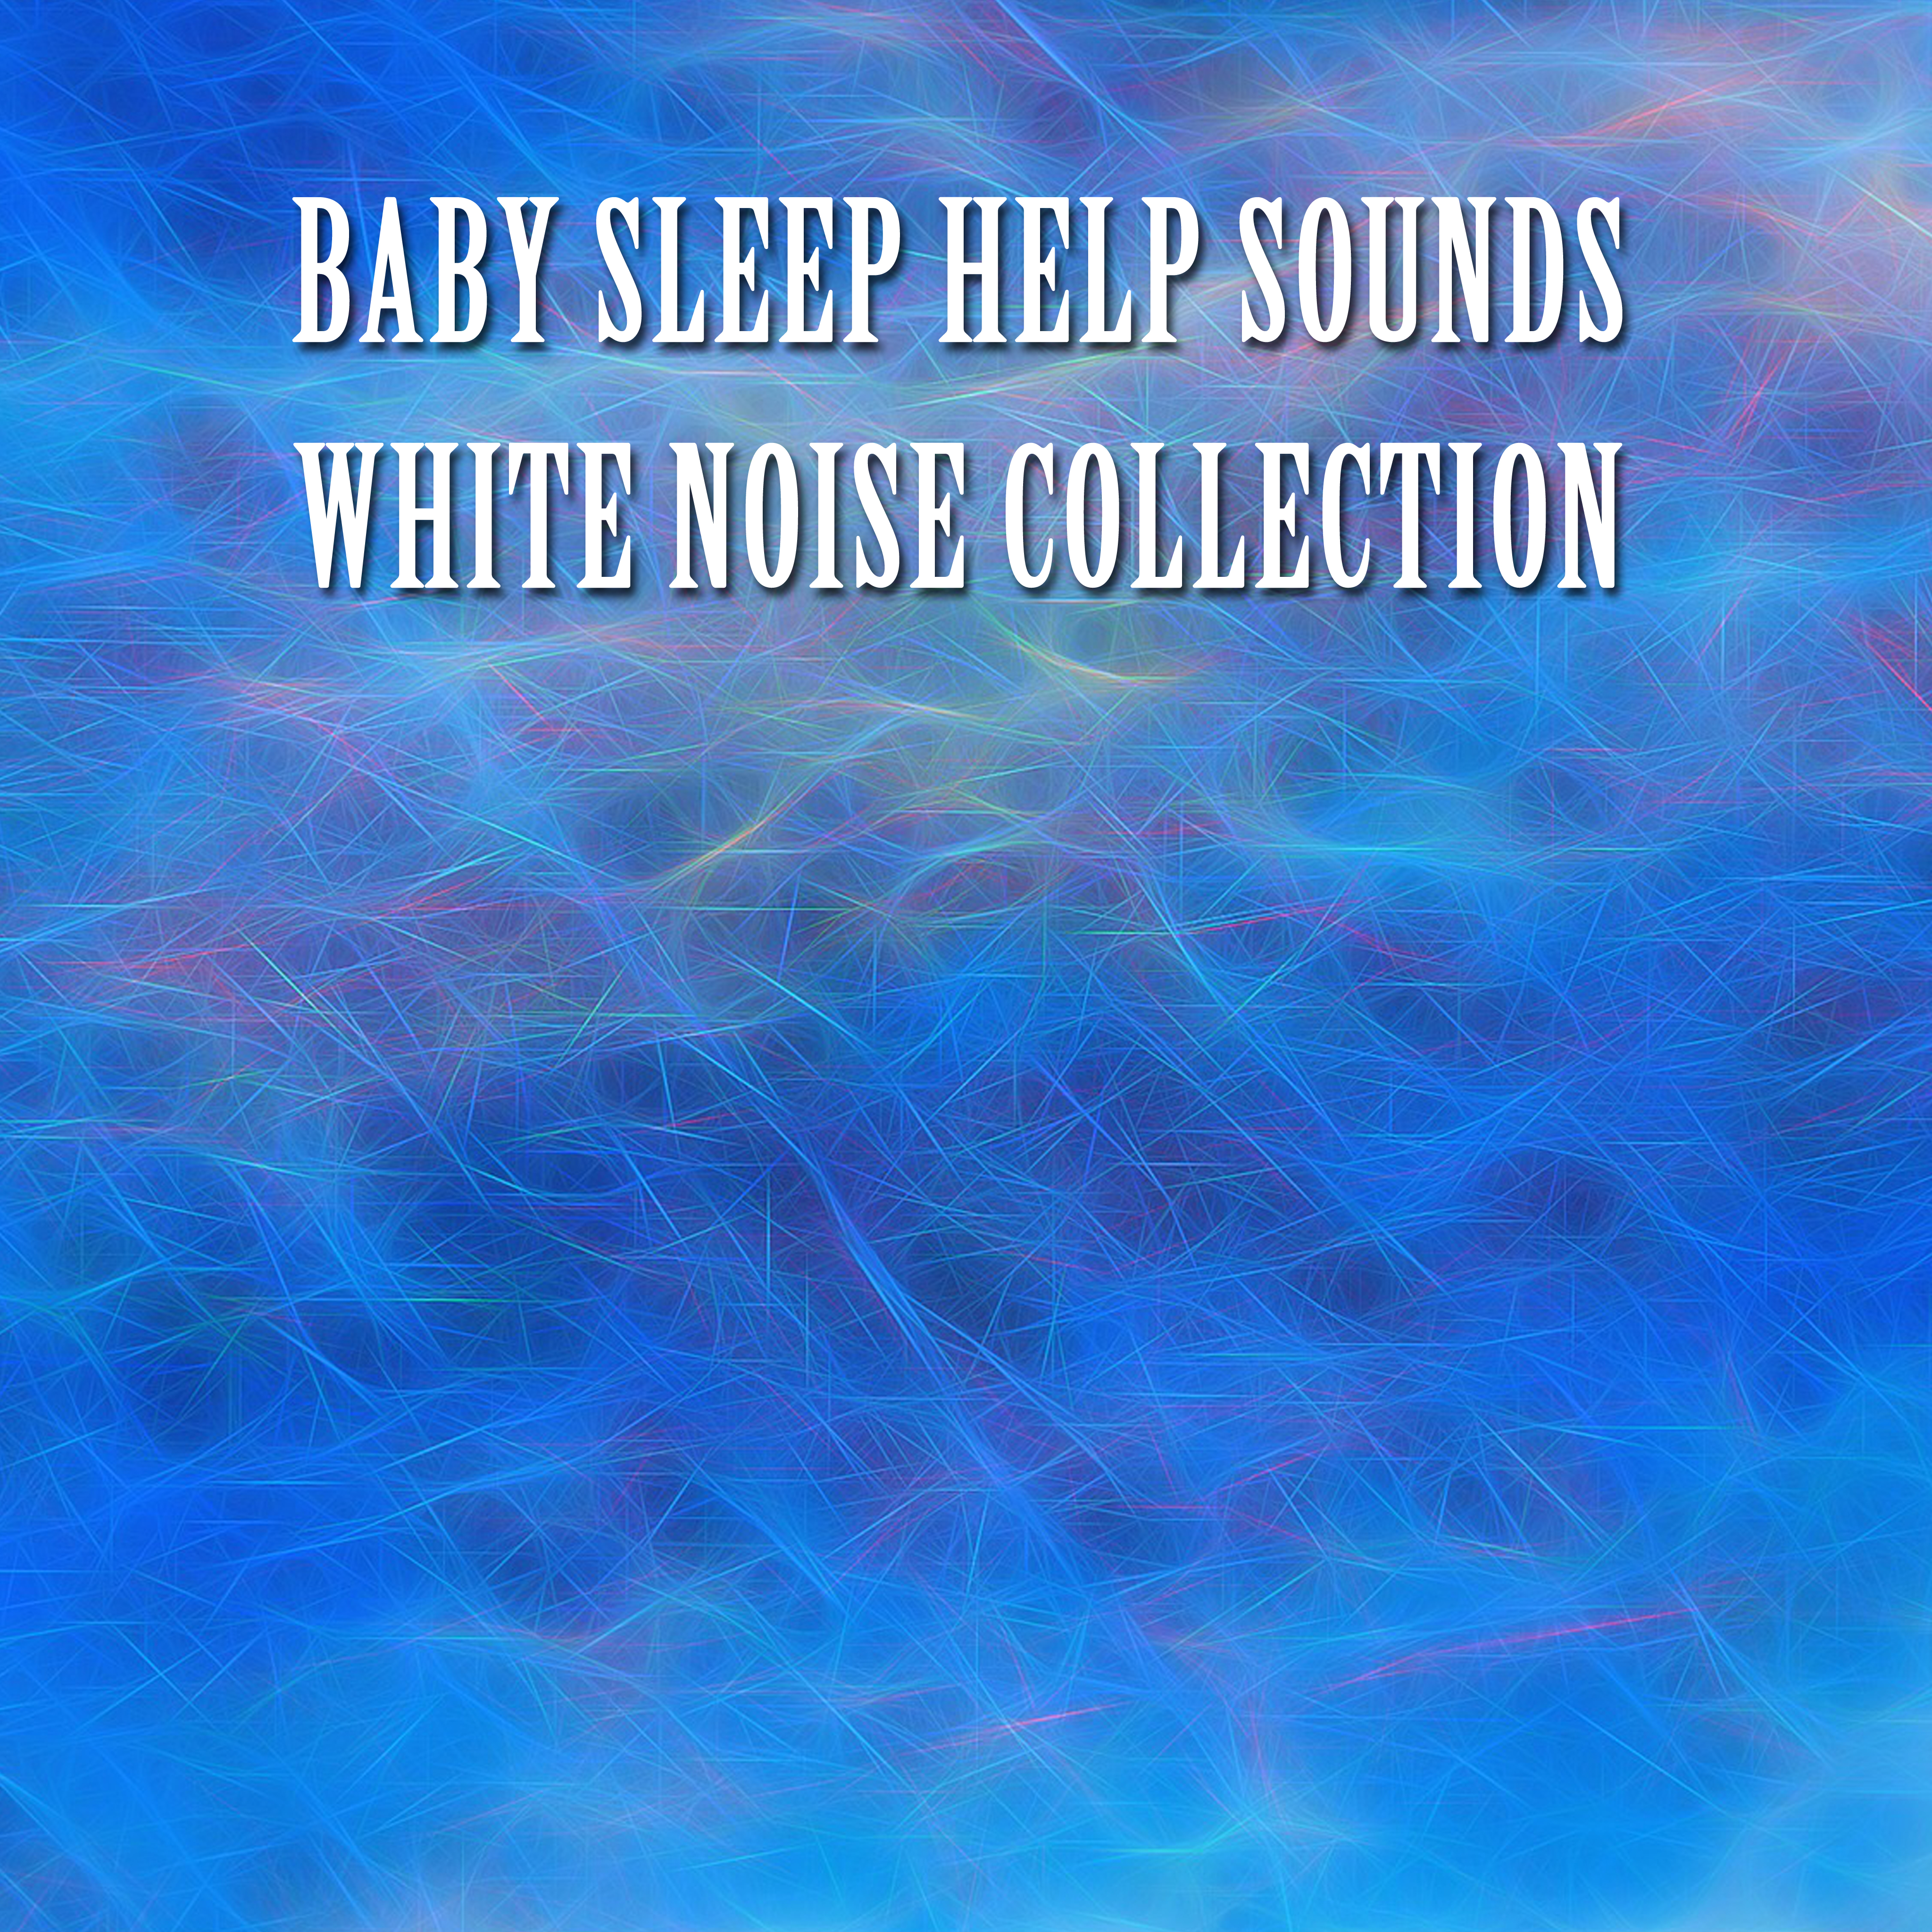 11 Baby Sleep Help Sounds - White Noise Collection